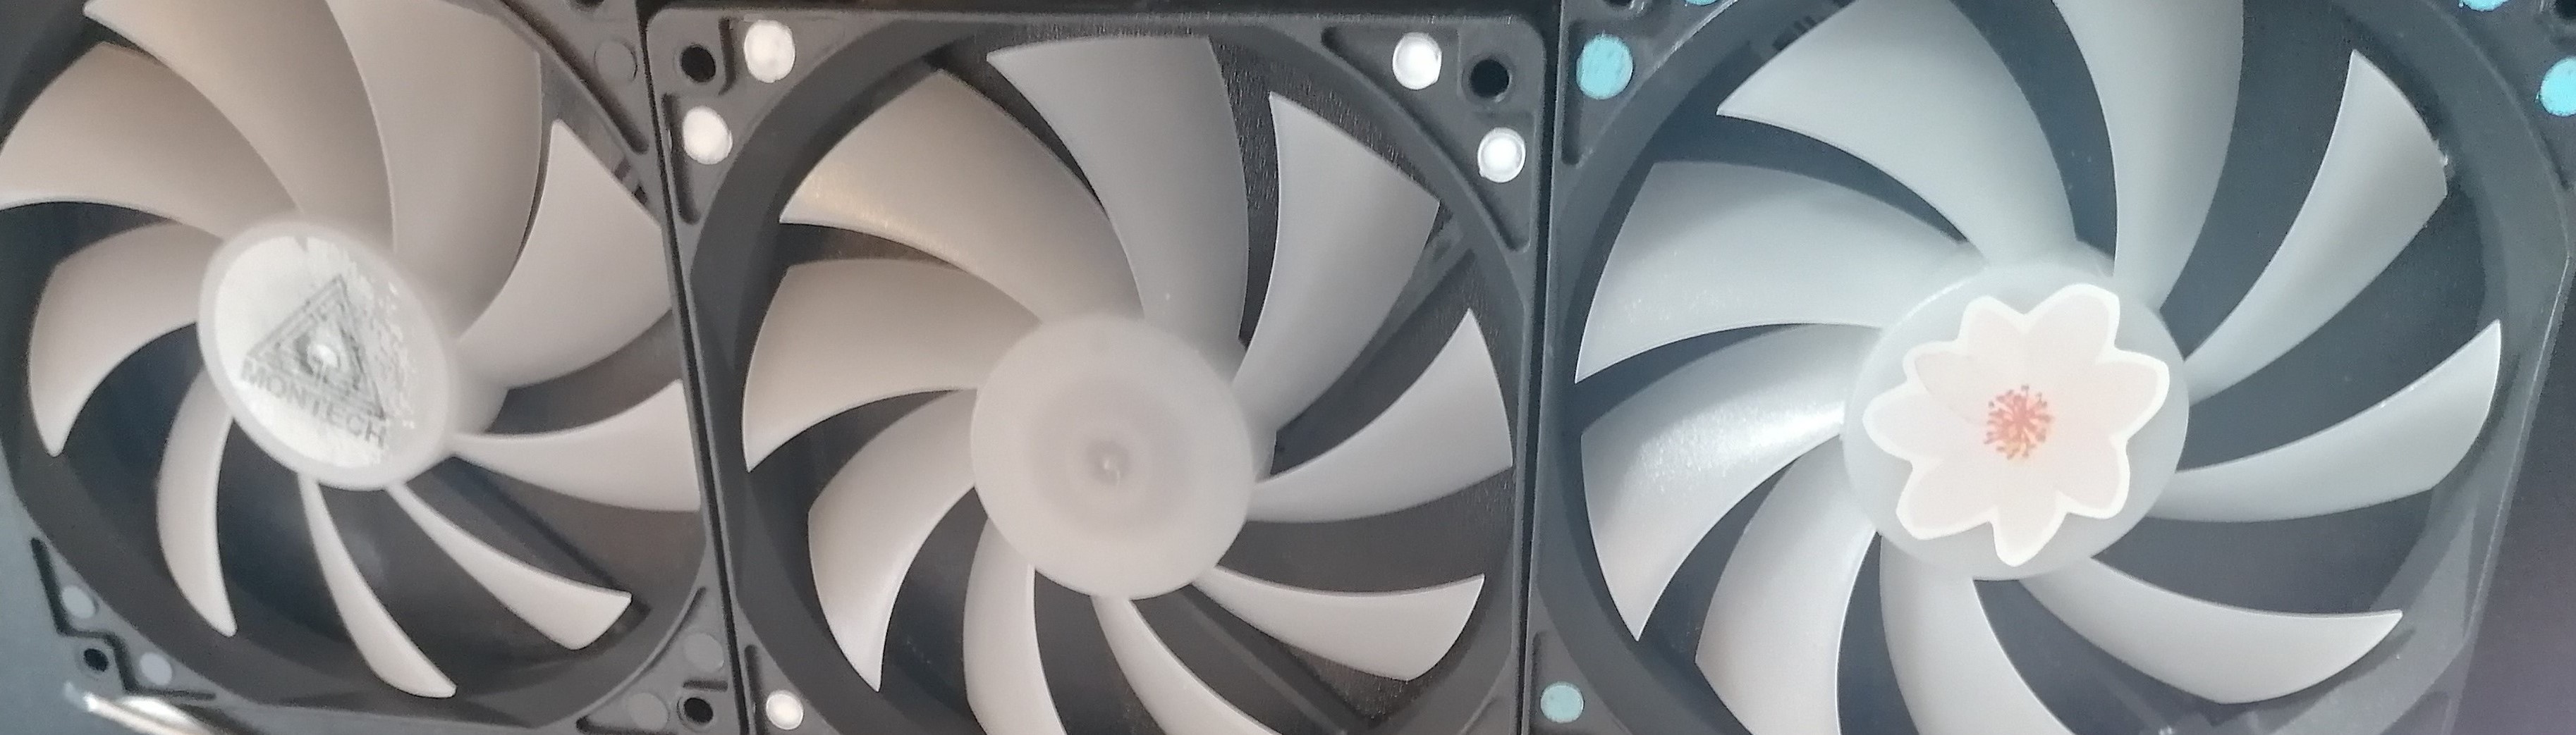 Three fans, one with a logo in the center, one clean, one with a flower sticker